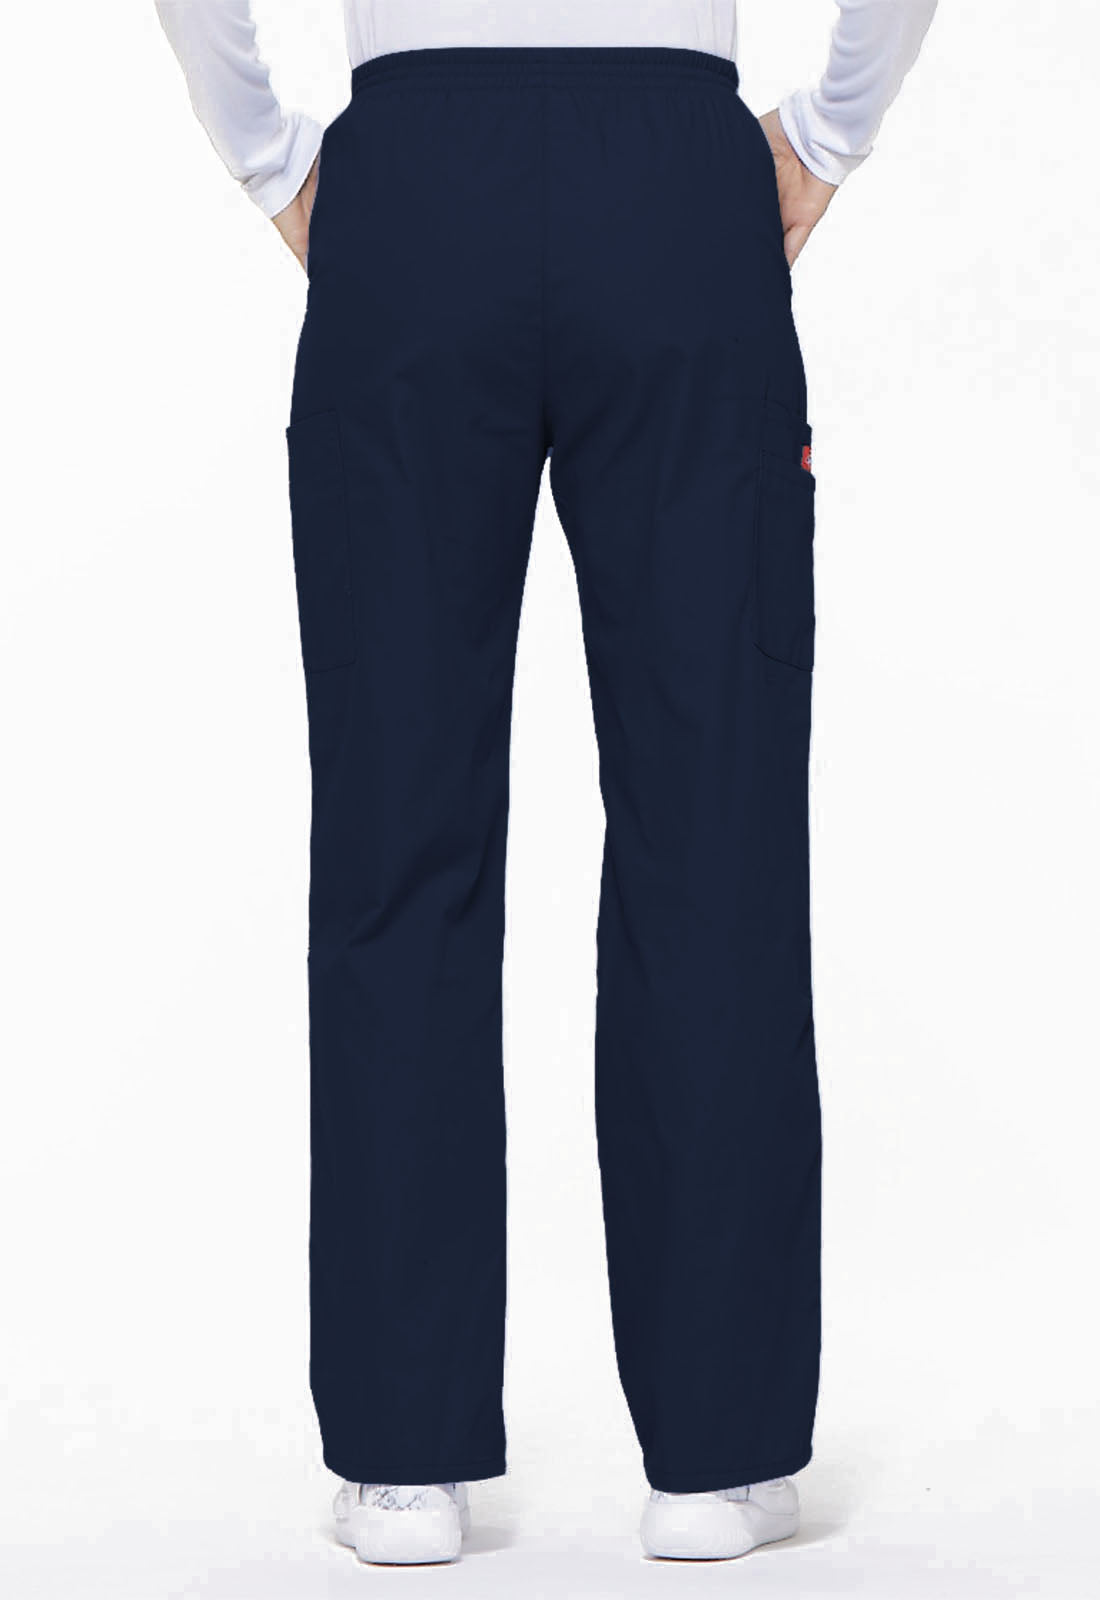 Natural Rise Tapered Leg Pull-On Pant 86106